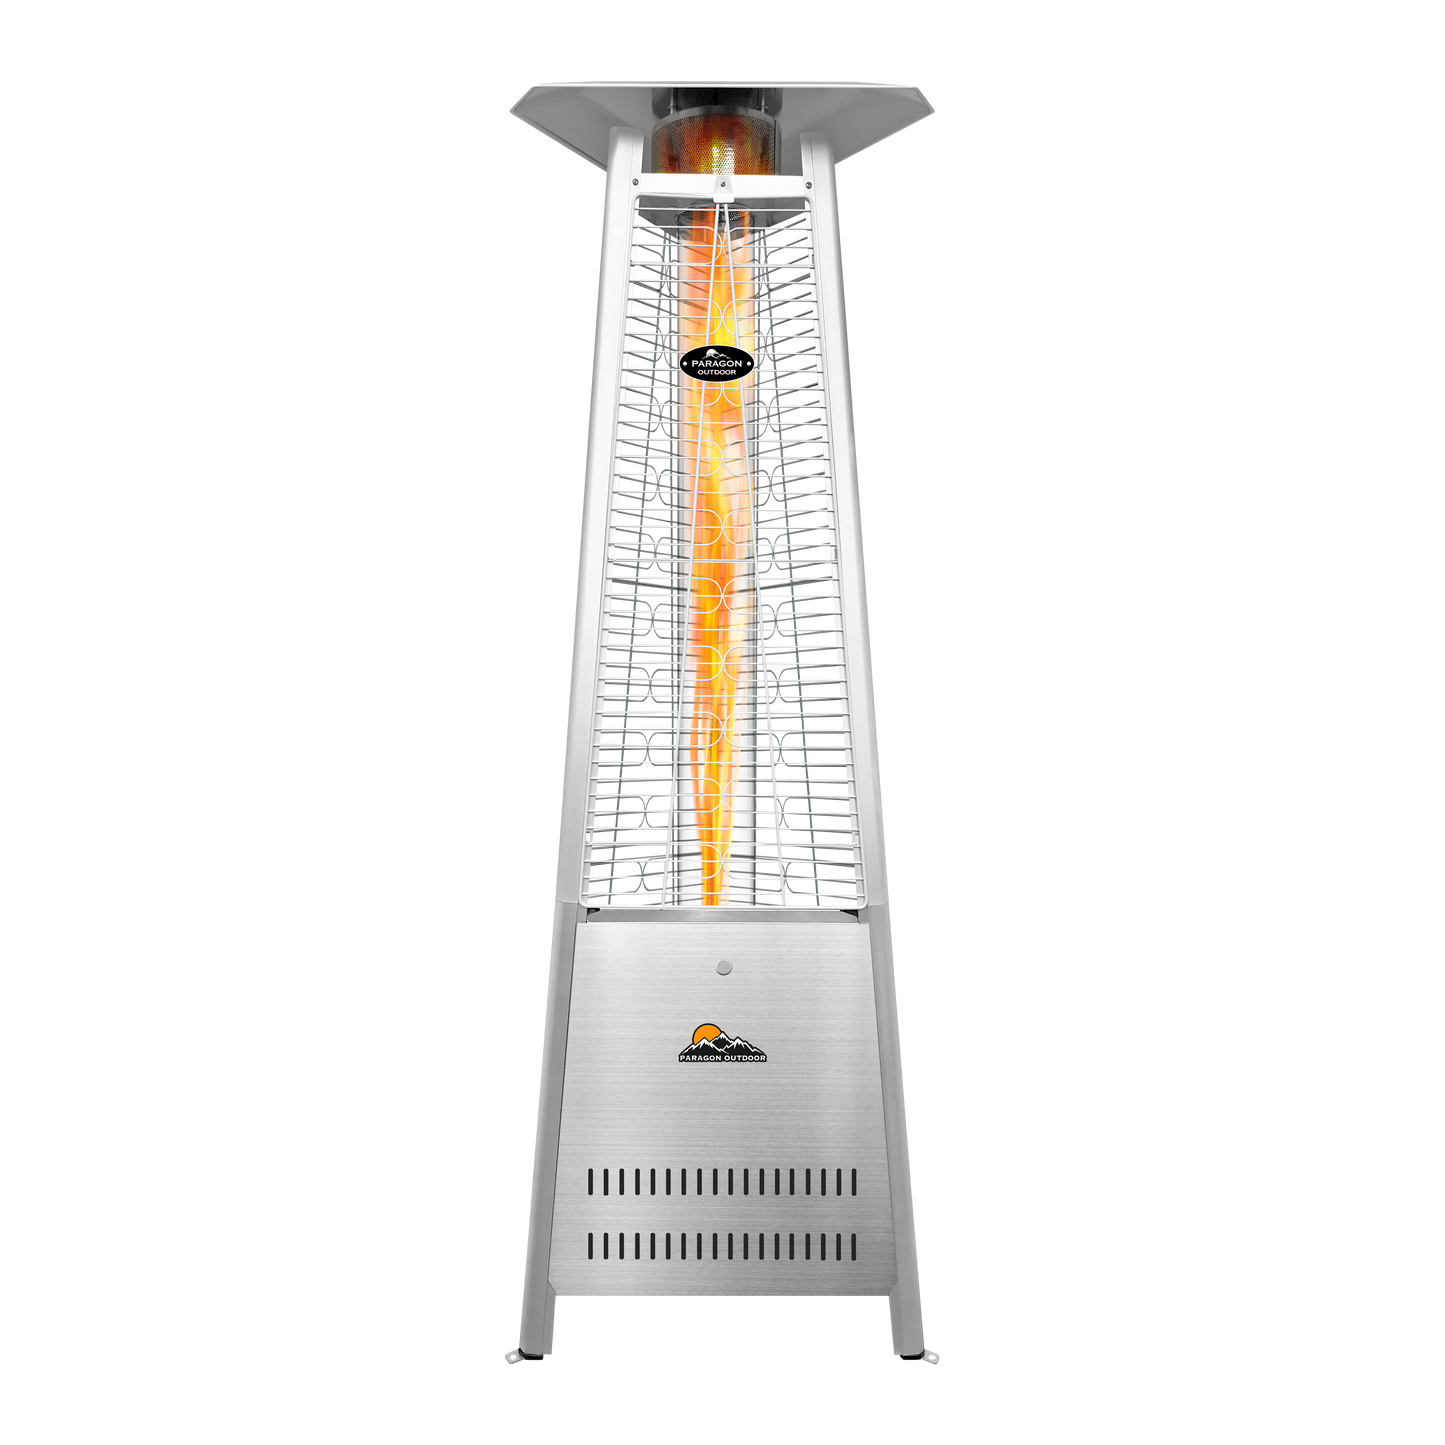 Inferno Boost Stainless Steel Flame Tower Heater - 72.5”, 42,000 BTUs - Propane